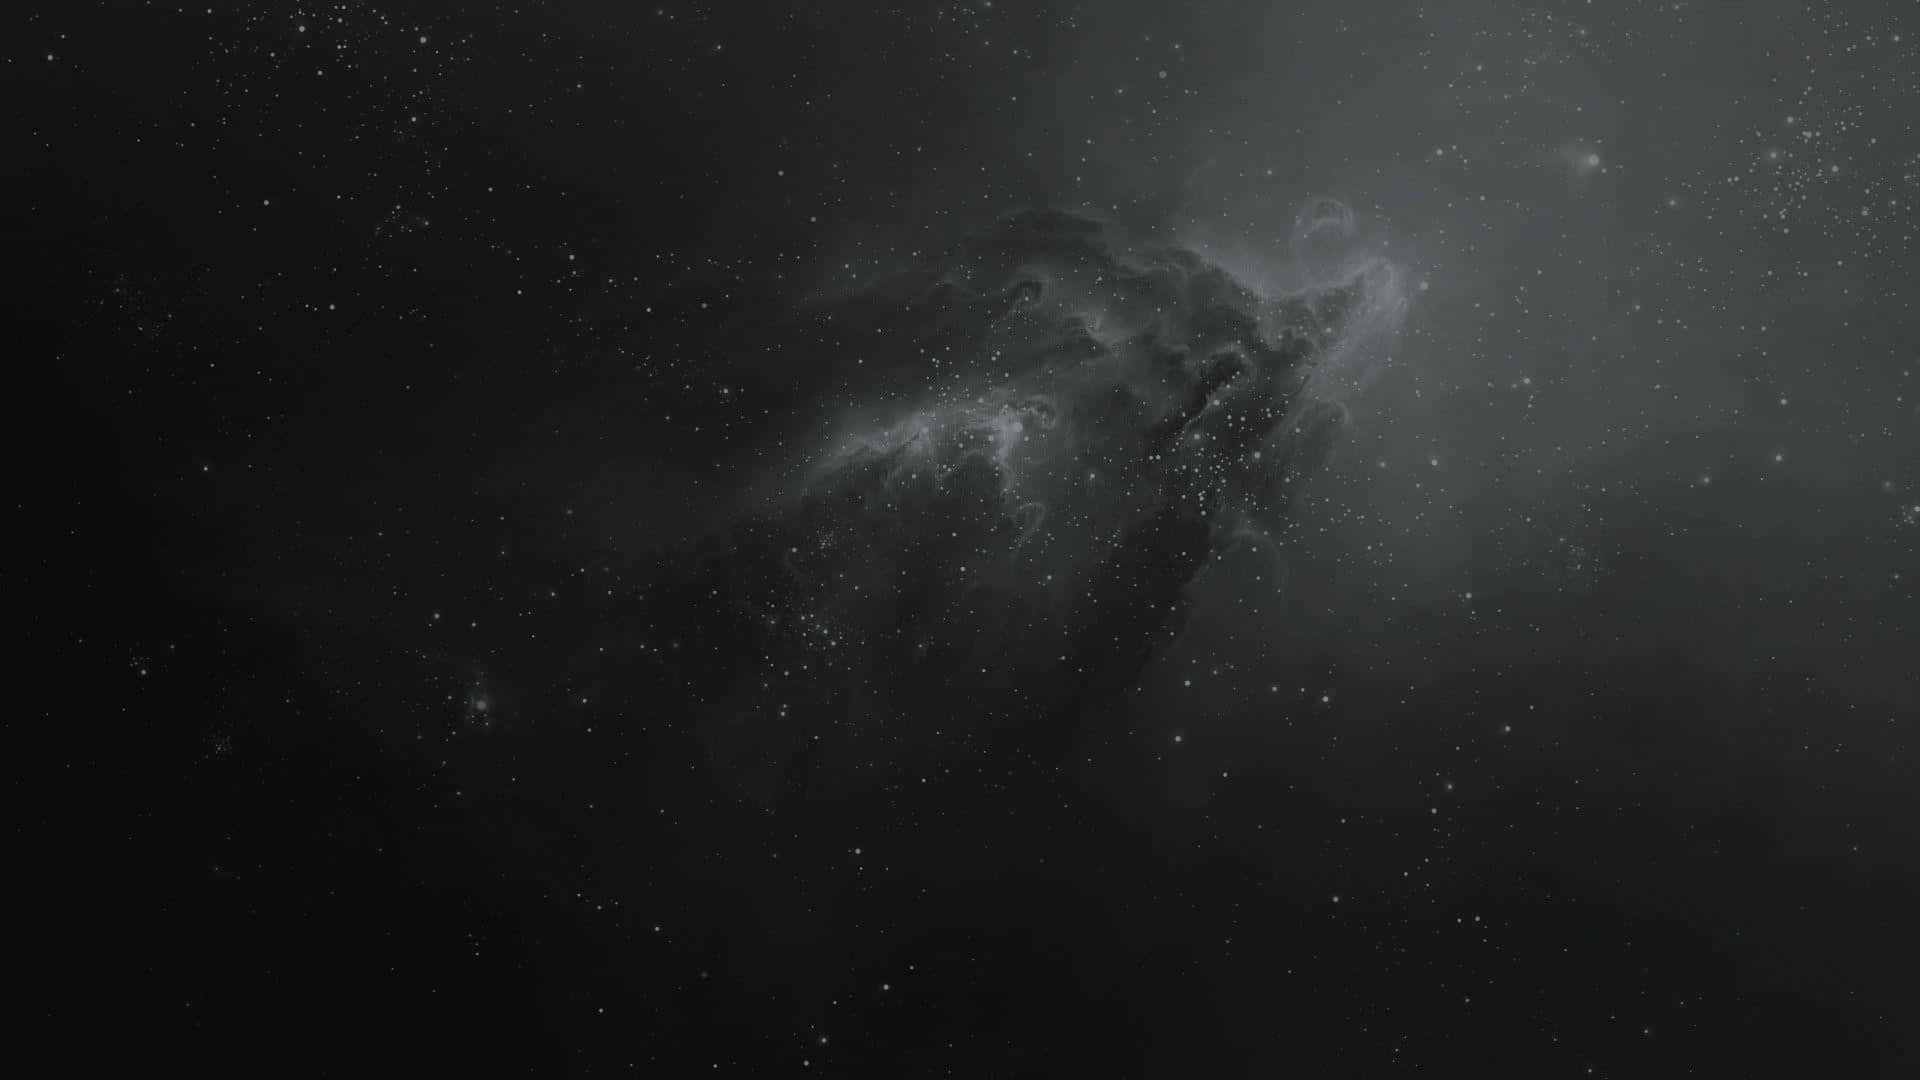 "Limitless exploration awaits in the timeless black and white space" Wallpaper